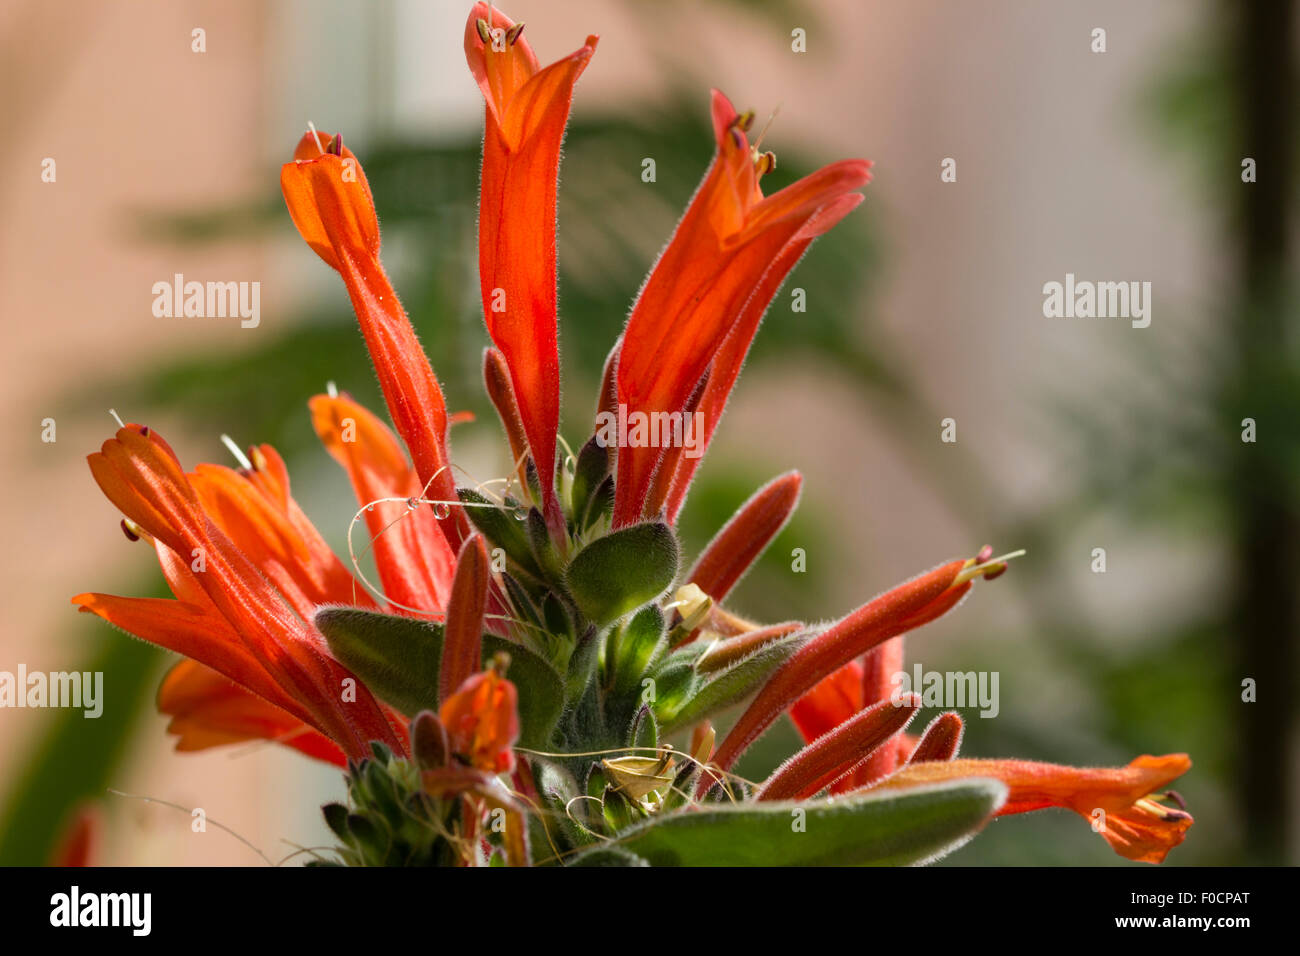 Flowers of the sub-tropical firecracker plant, Dicliptera suberecta. Stock Photo